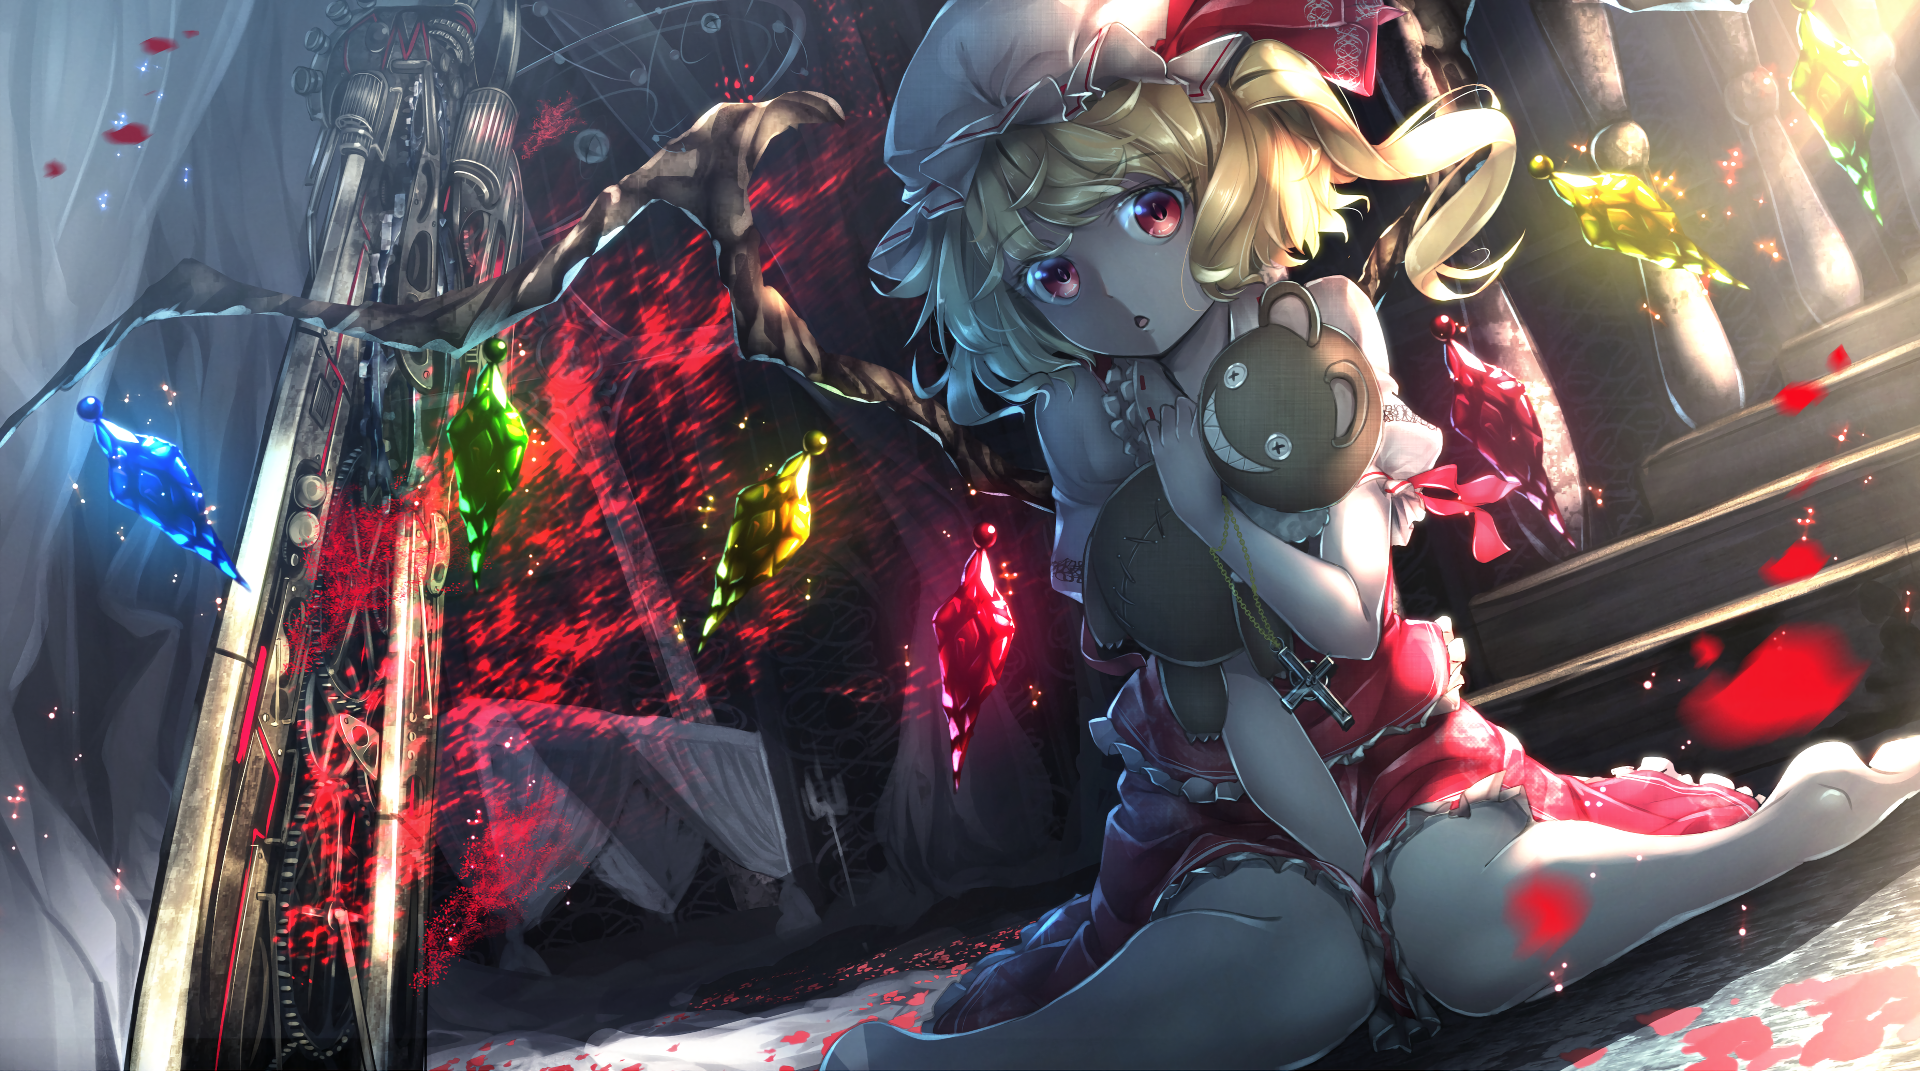 Anime Anime Girls Touhou Petals Hat Blonde Cross Teddy Bears Flandre Scarlet Stairs Red Eyes 1920x1072